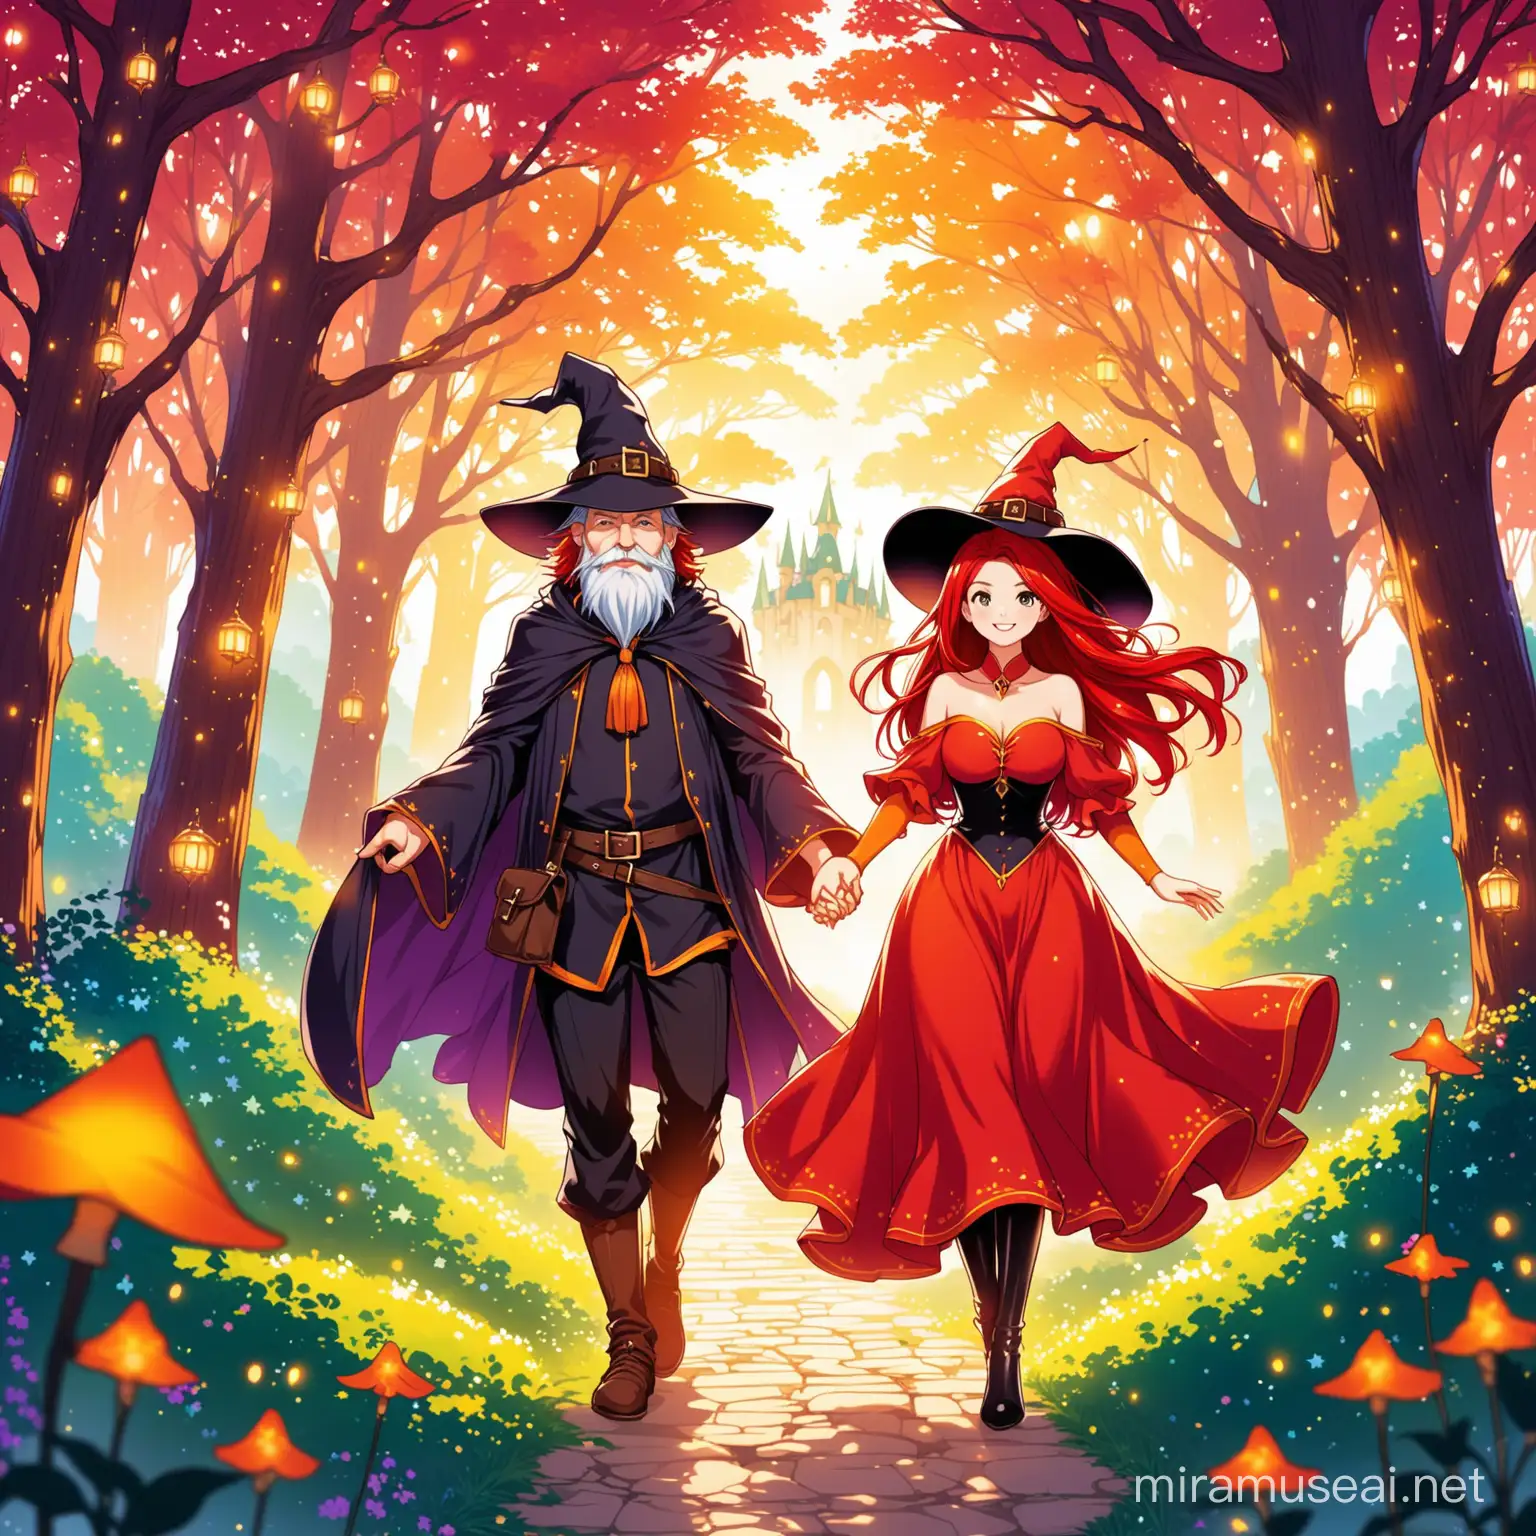 a bright red-haired witch and a wizard in an enchanting setting